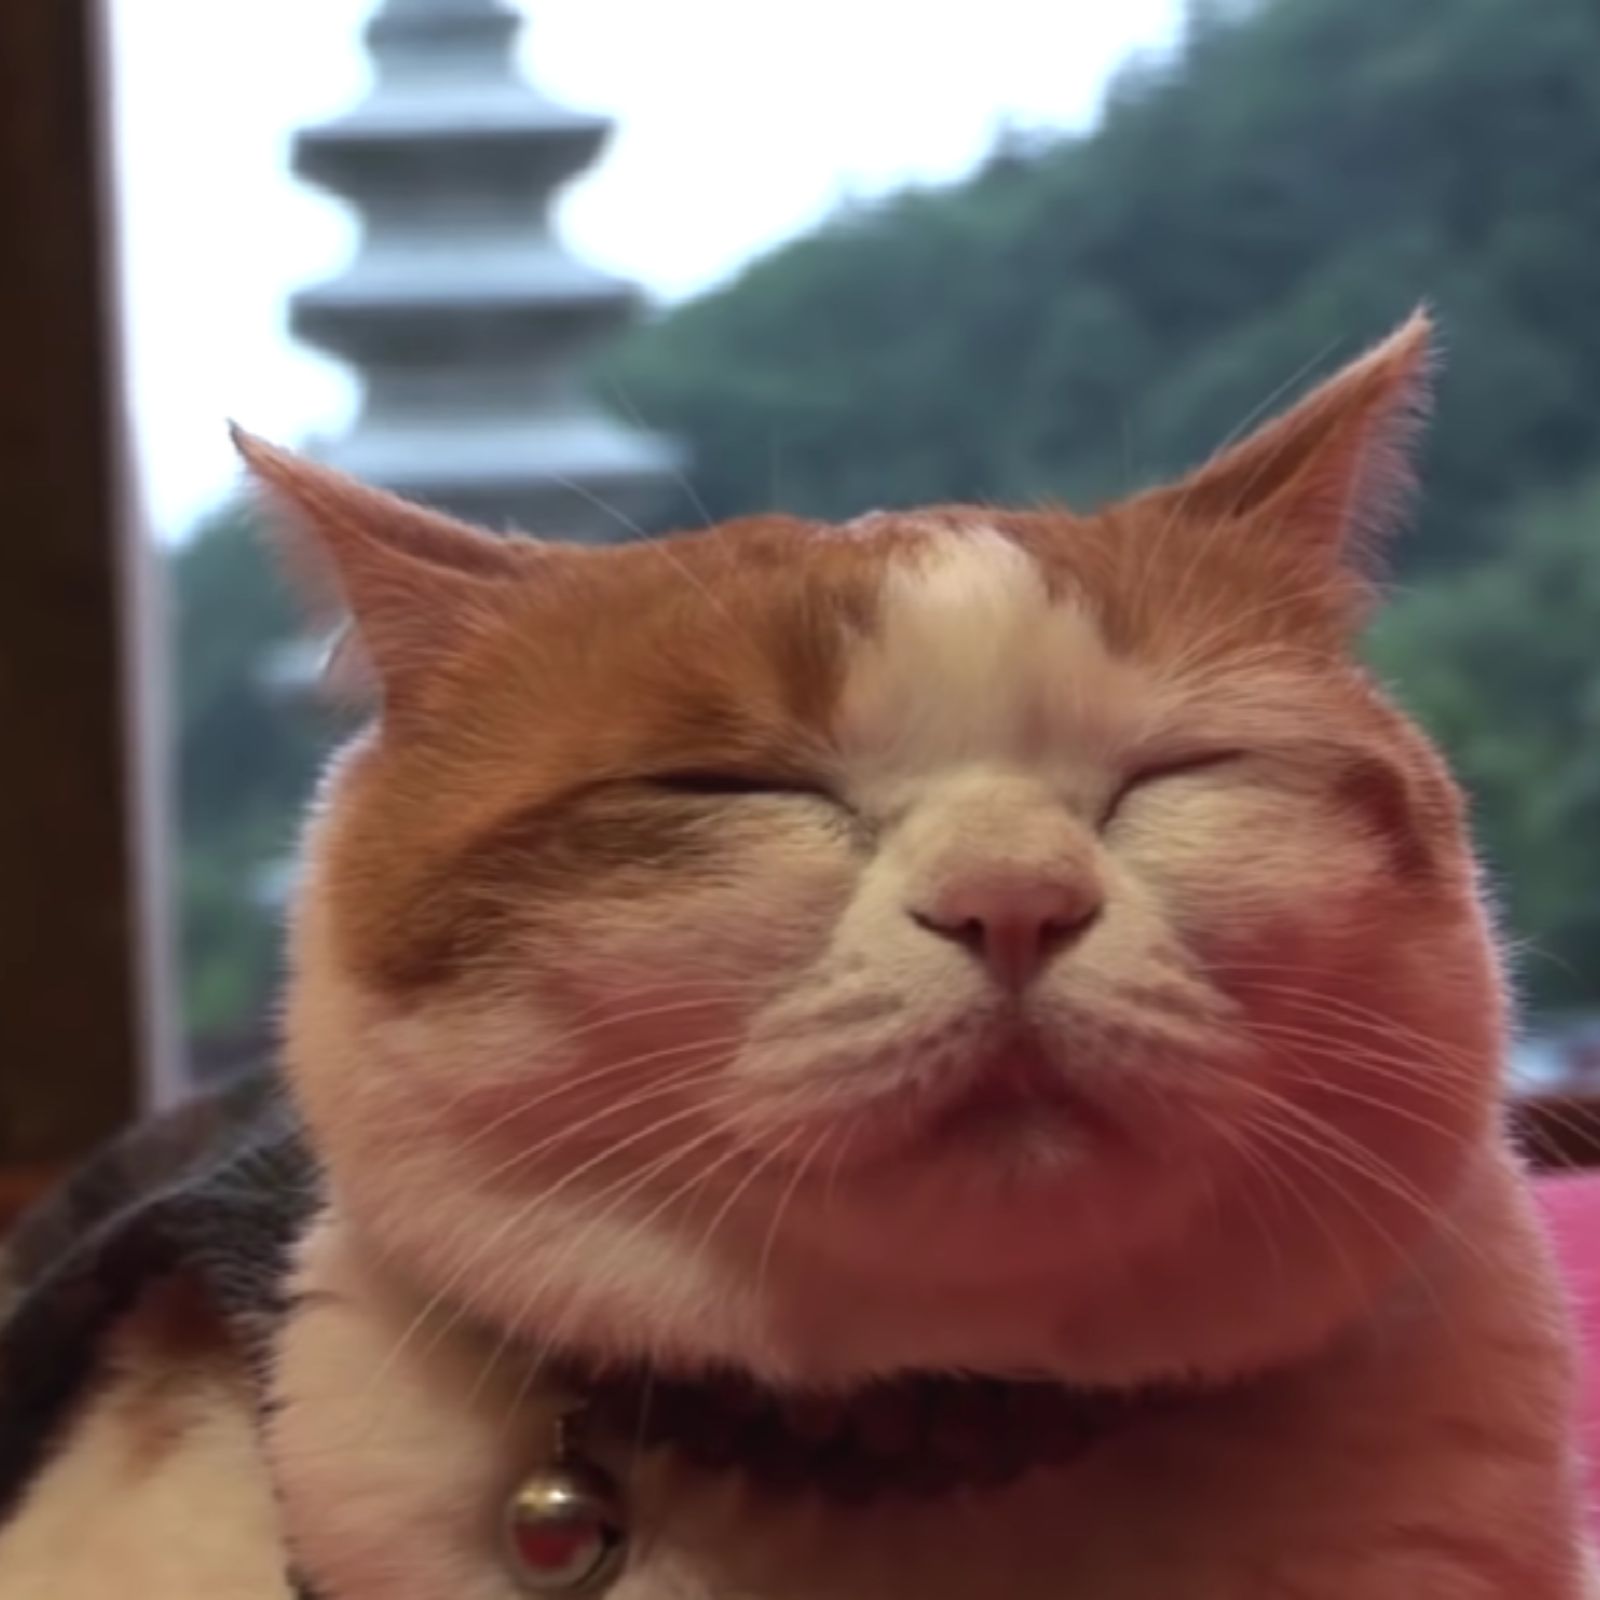 close-up photo of cat with closed eyes